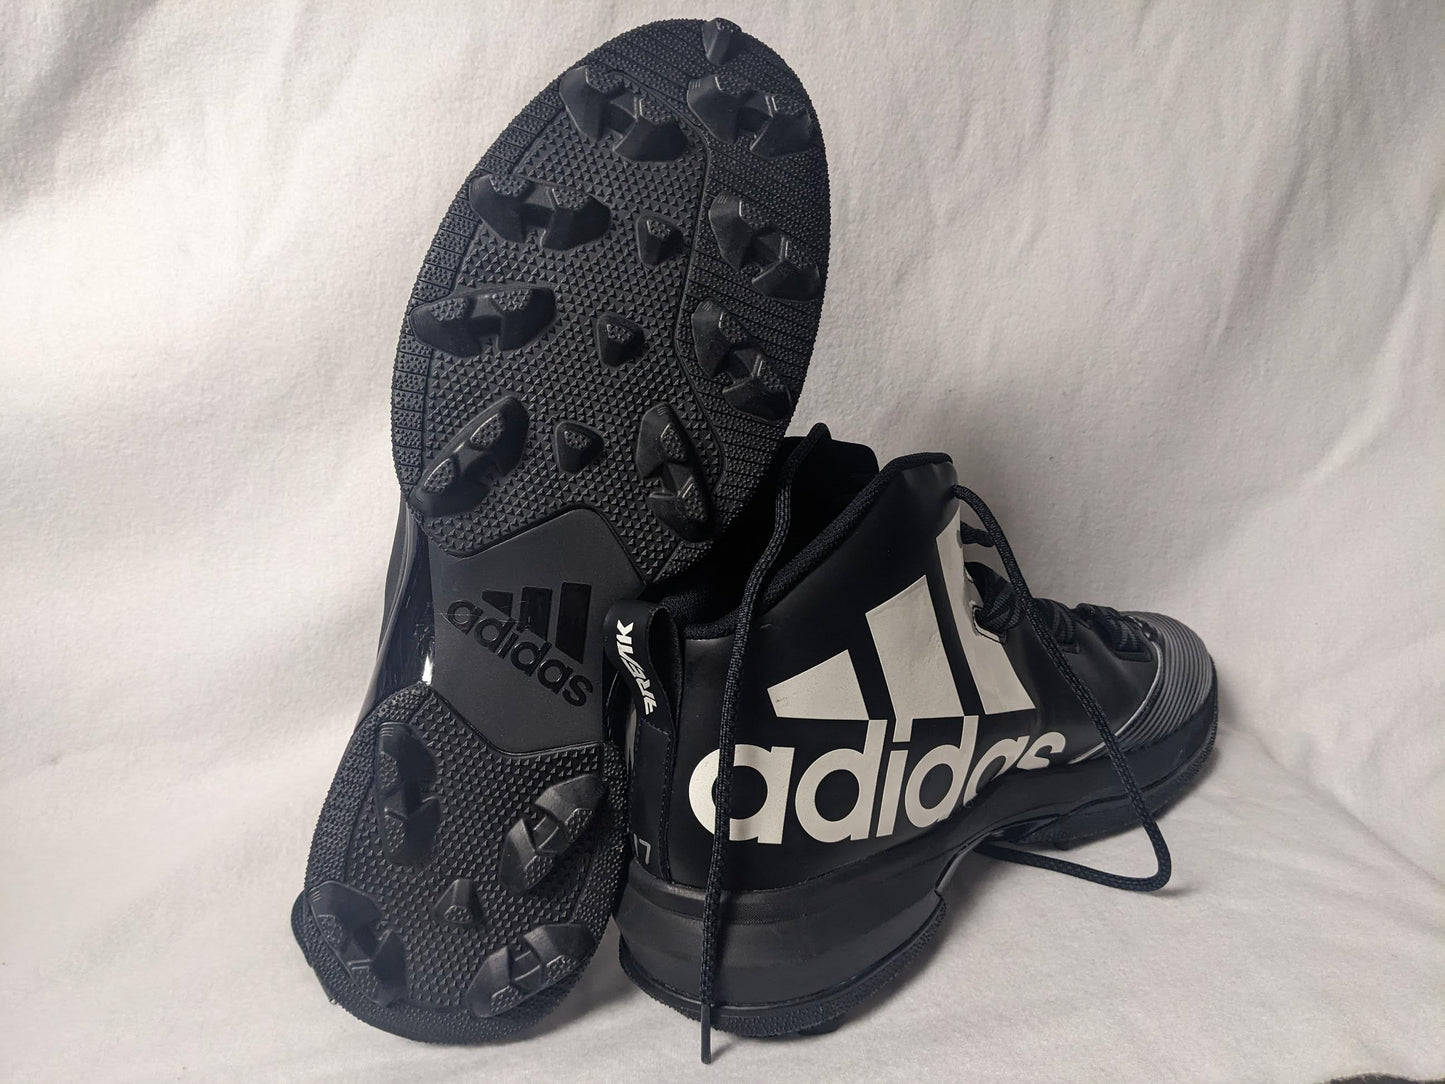 Adidas Freak adult Cleats Size 17 Color Black Condition Used